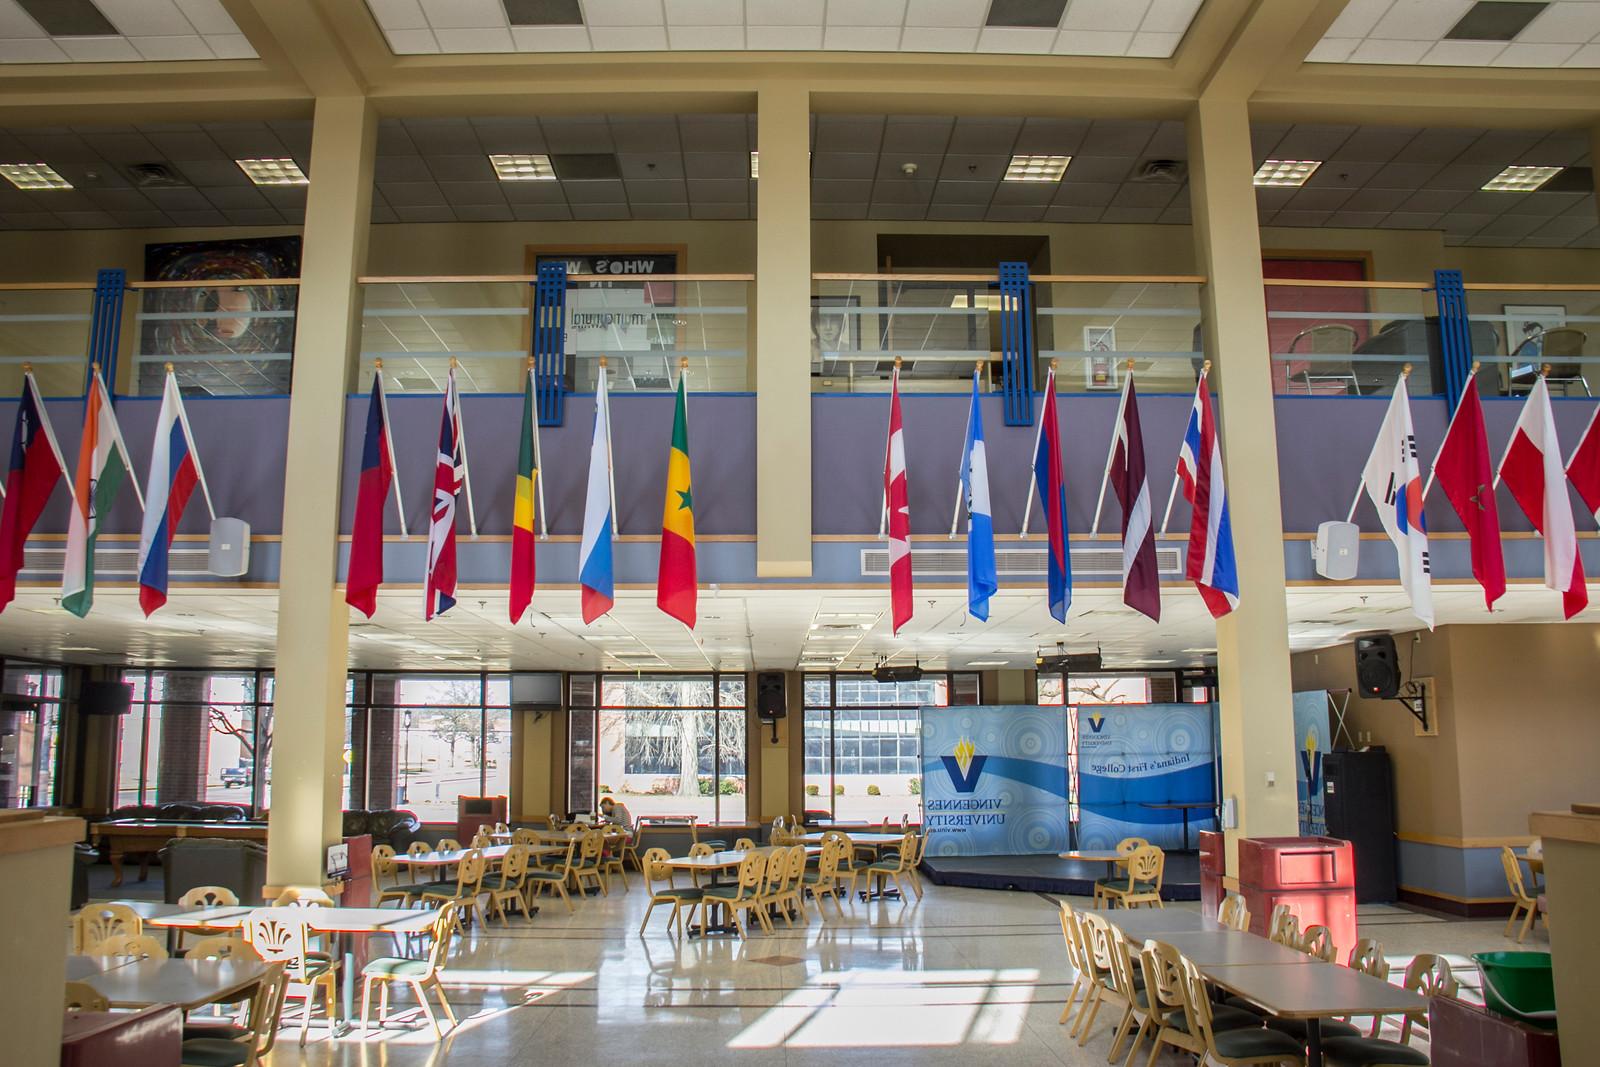 A photograph of the flags hanging in Beckes Student Union